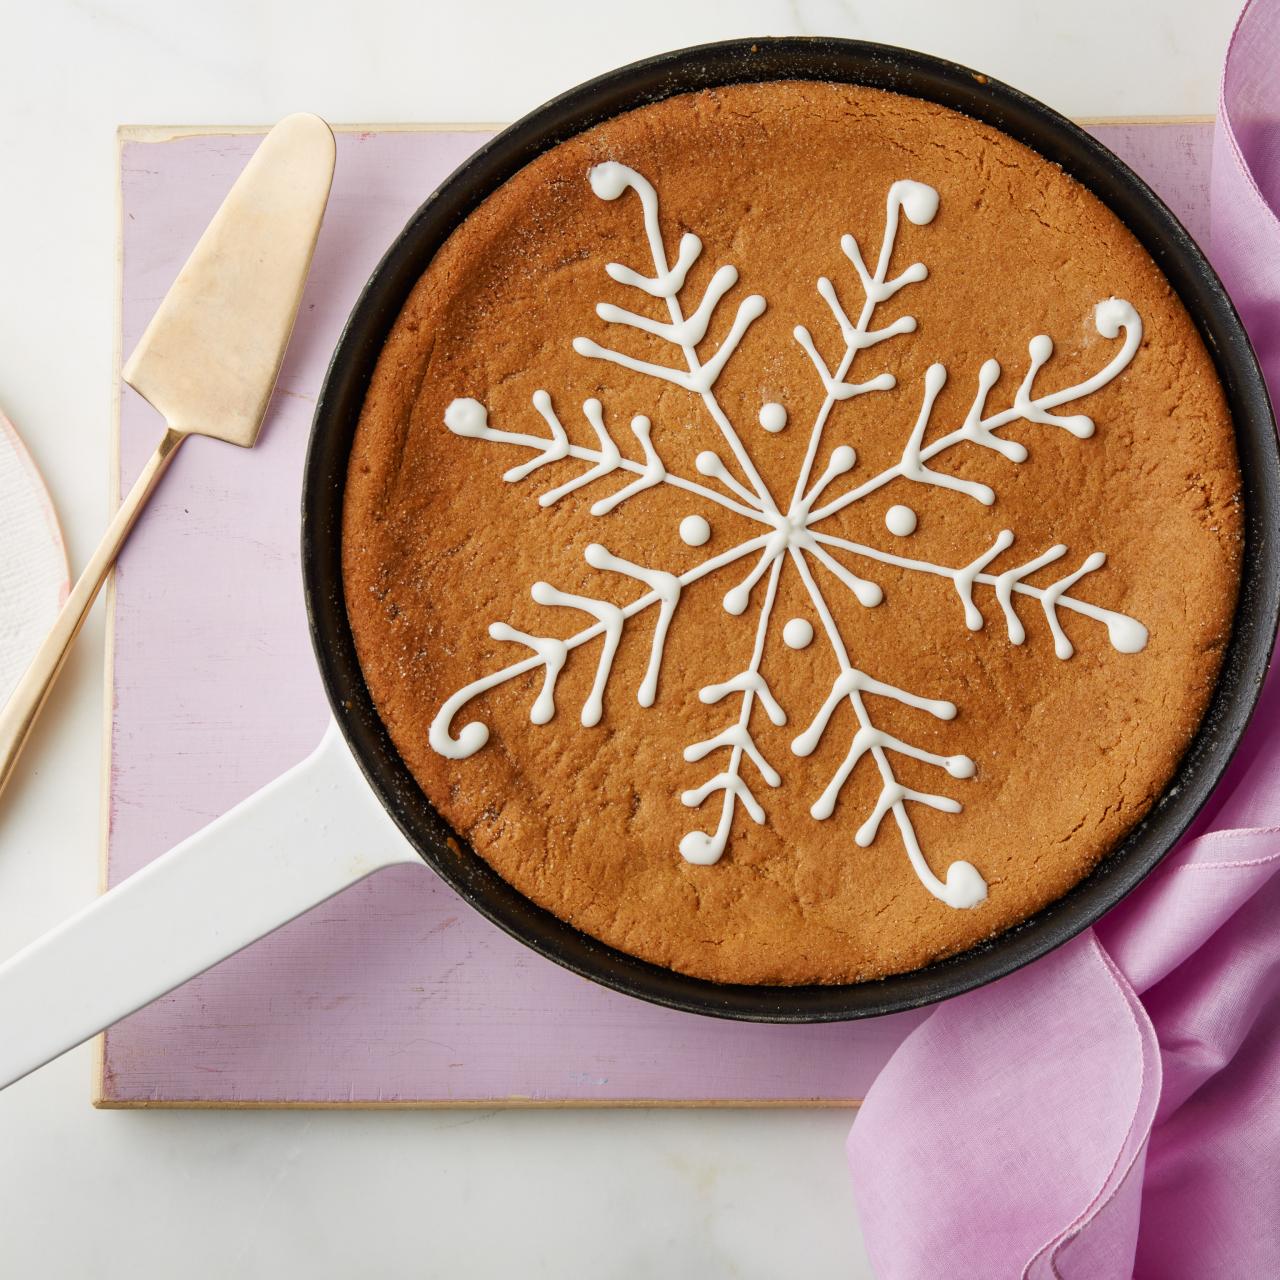 Cast Iron Skillet Gingerbread Cookie for Two - Dessert for Two